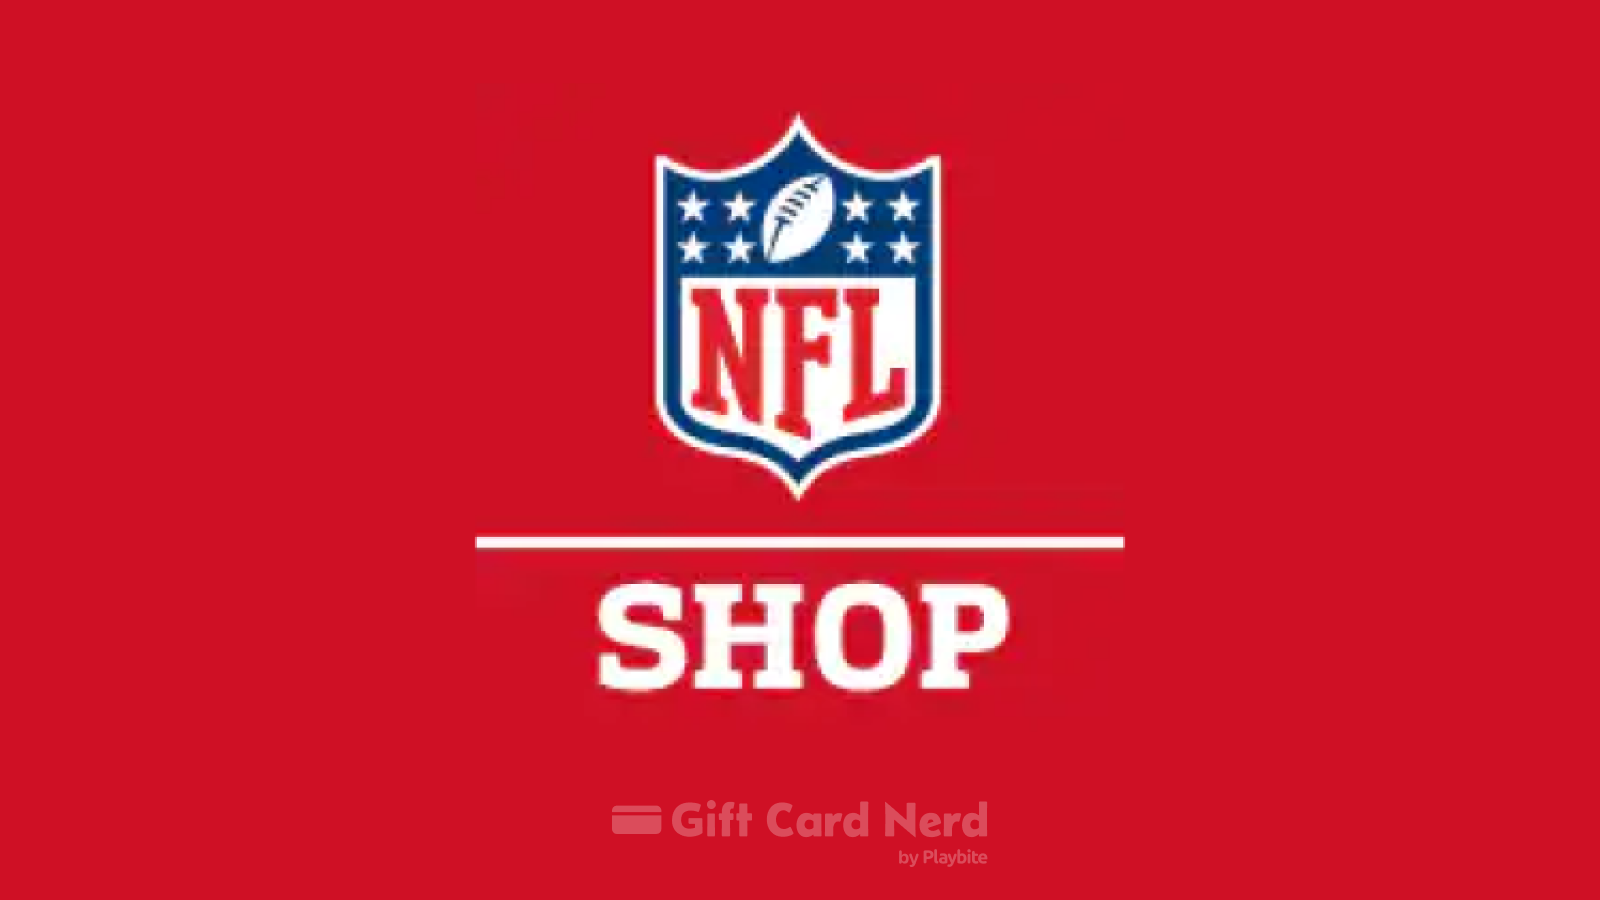 How to Check Your NFL Shop Gift Card Balance